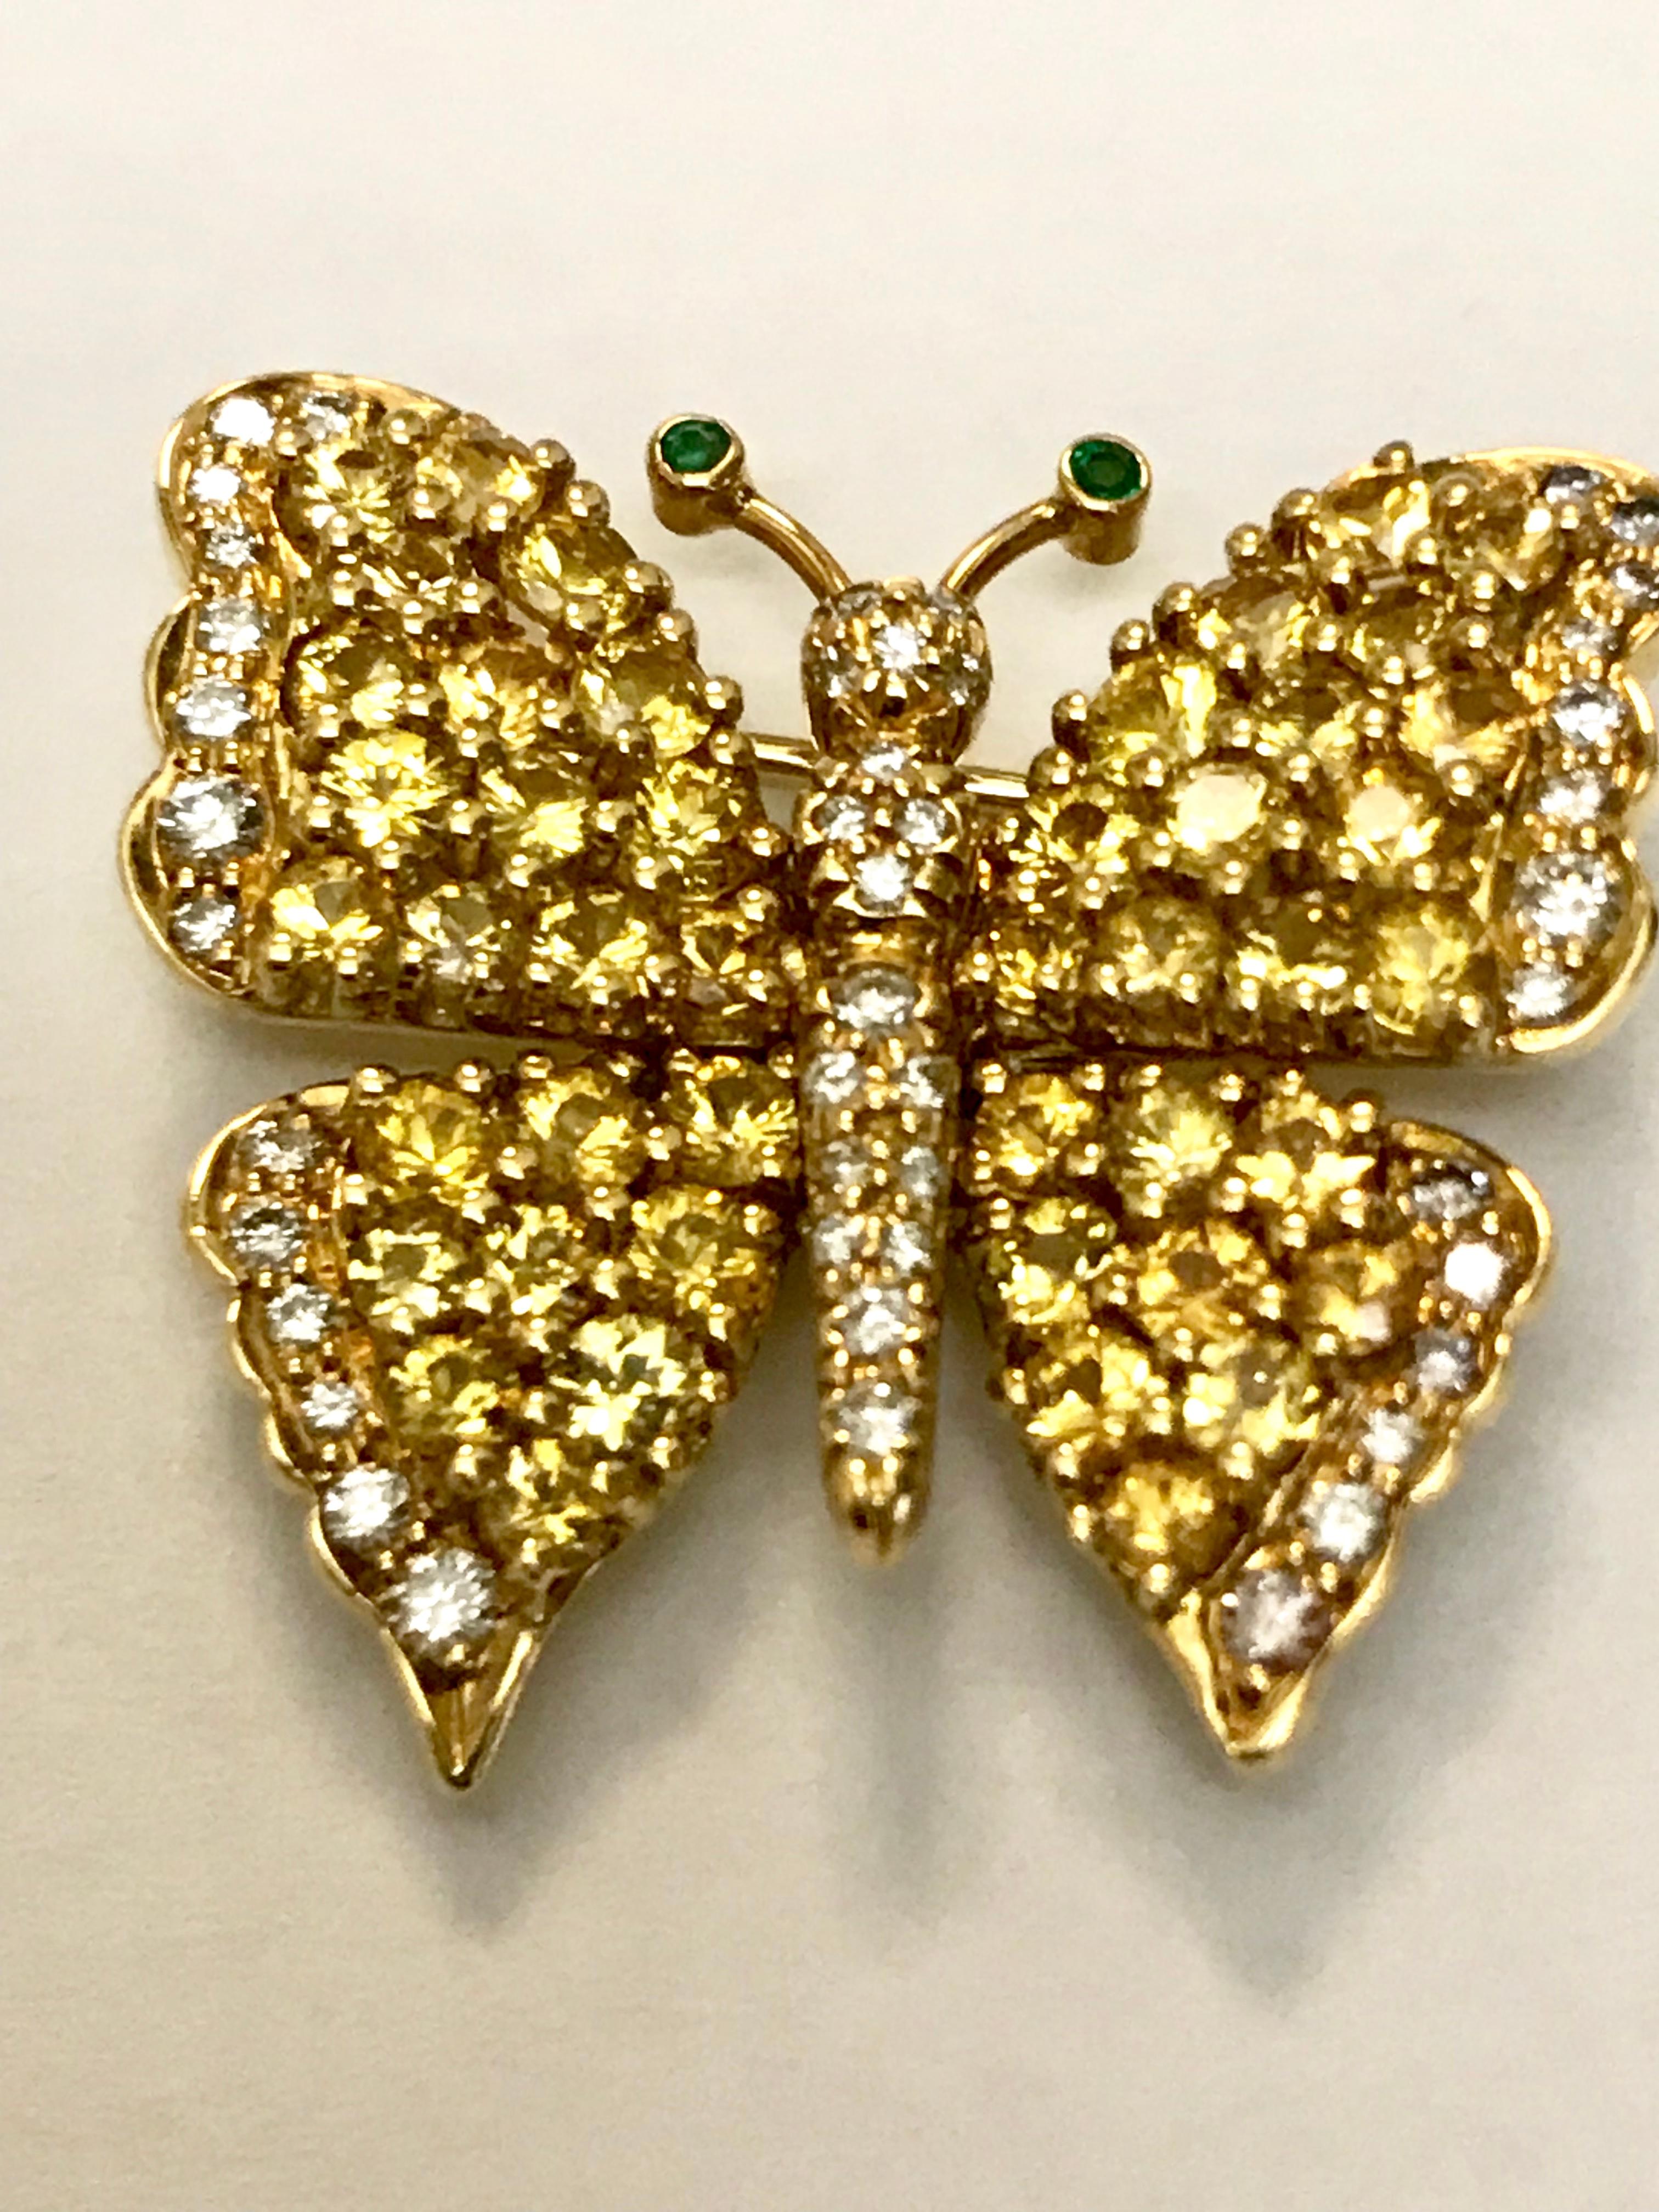 The vibrant Yellow Sapphires reminds you of Spring! Contrasted with the F/G color white diamonds makes it a perfect everyday piece, and don't forget the Emerald antennae!! There are 3.80 carats of Yellow Sapphires and .50 carats of diamonds. This